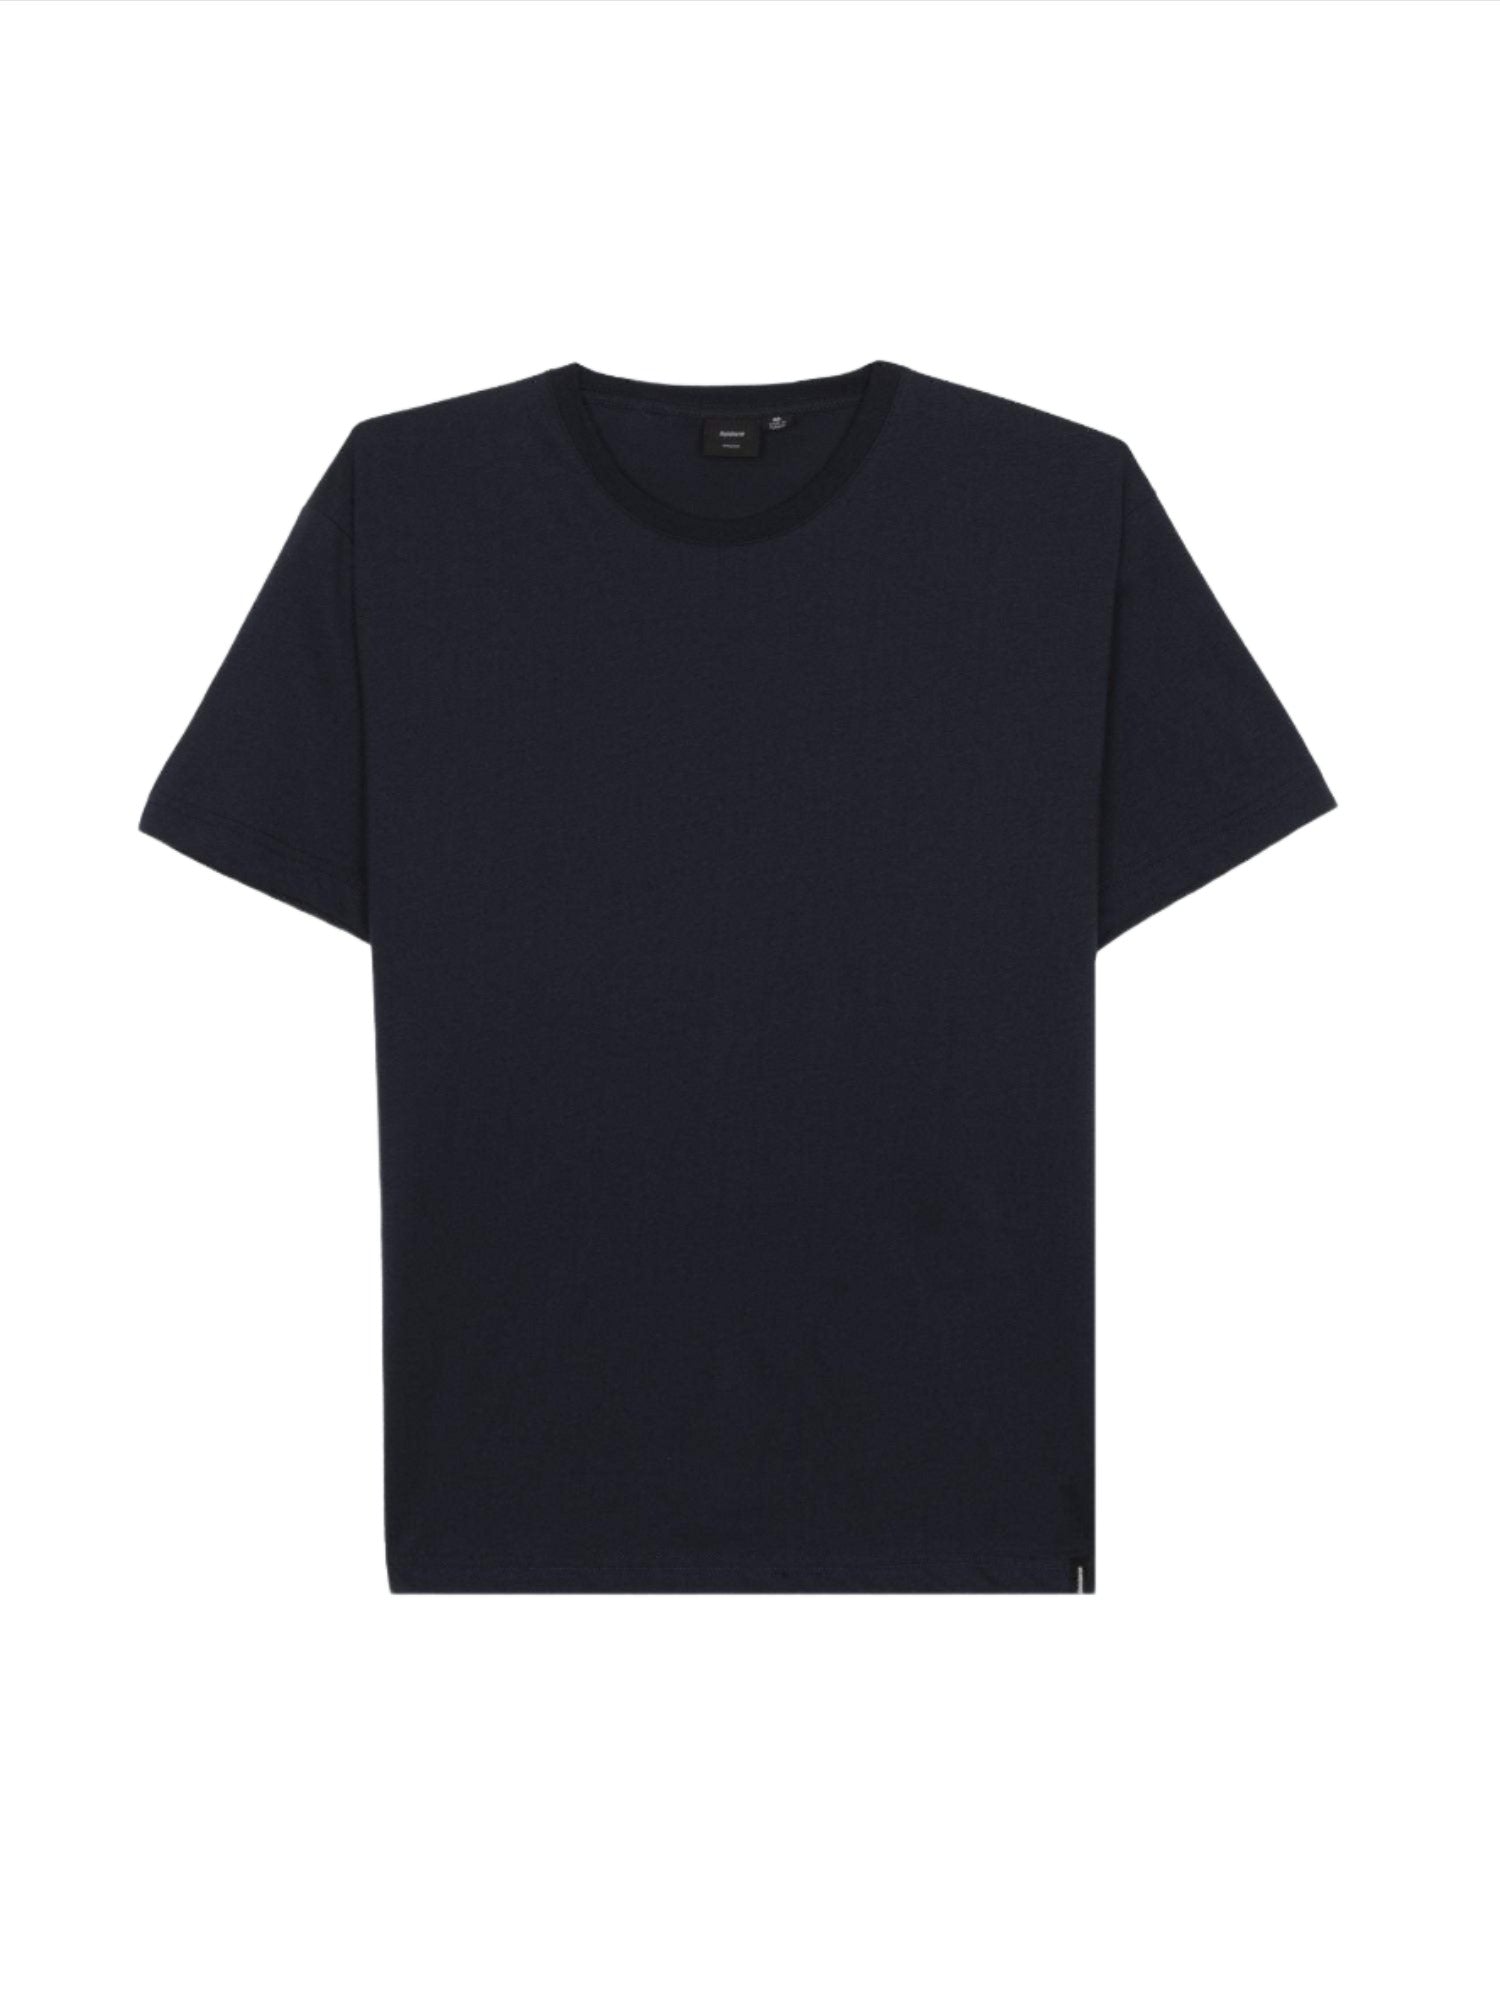 Harlyn SS T-shirt by Finisterre